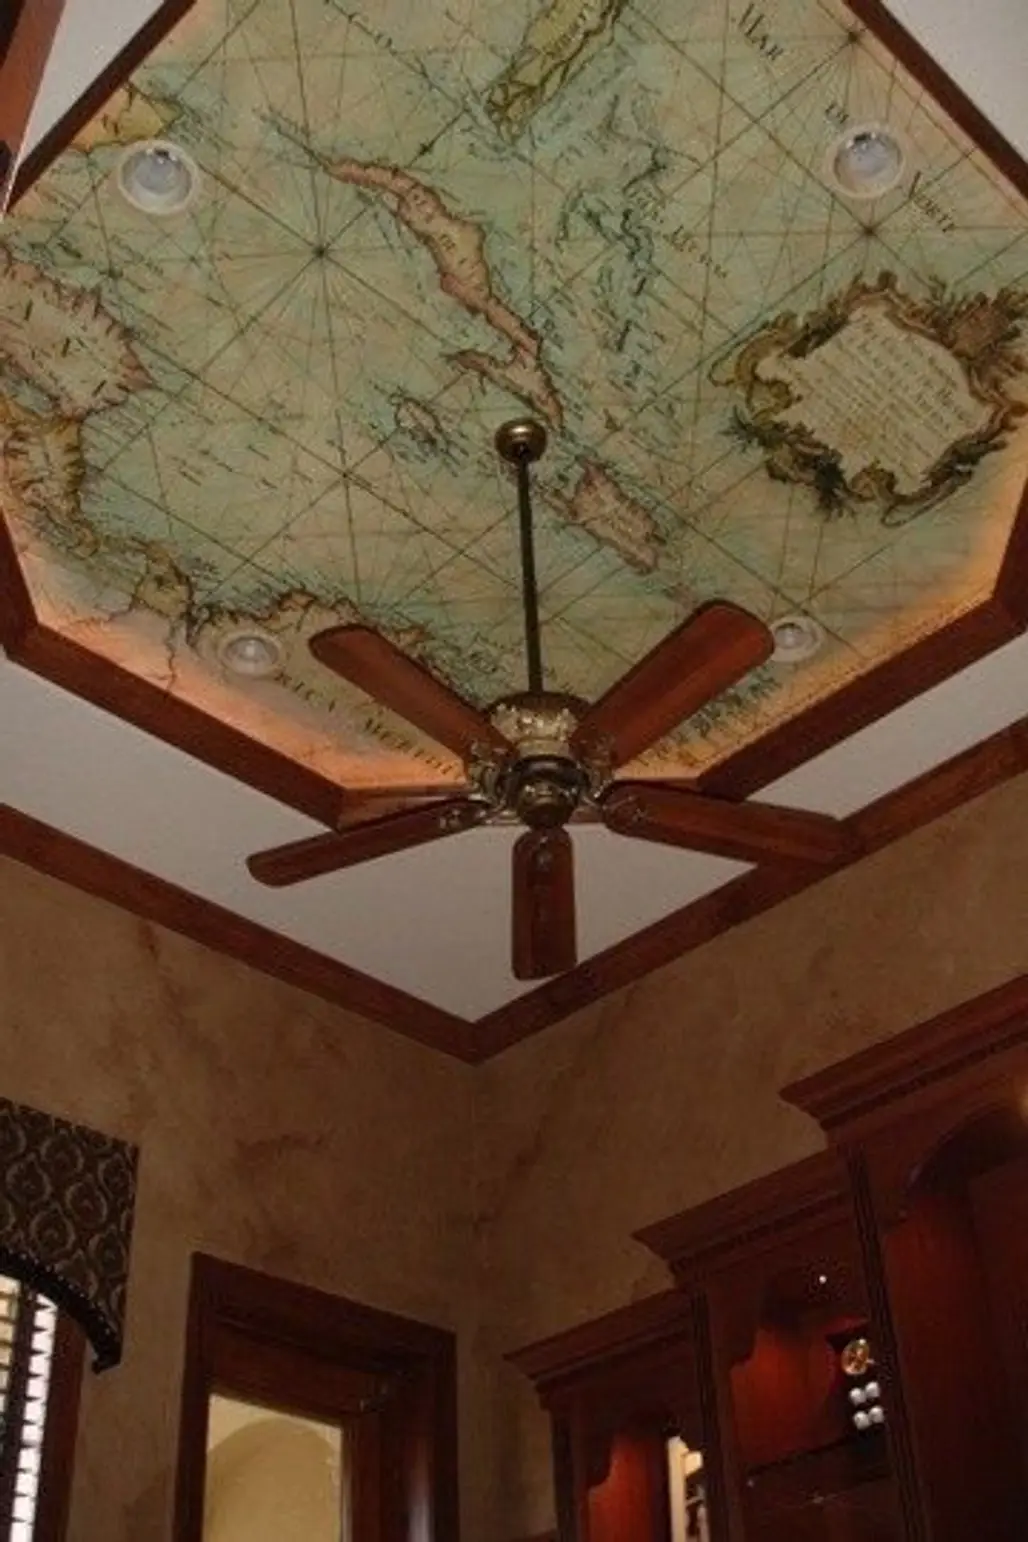 Wallpaper with an Old Nautical Map